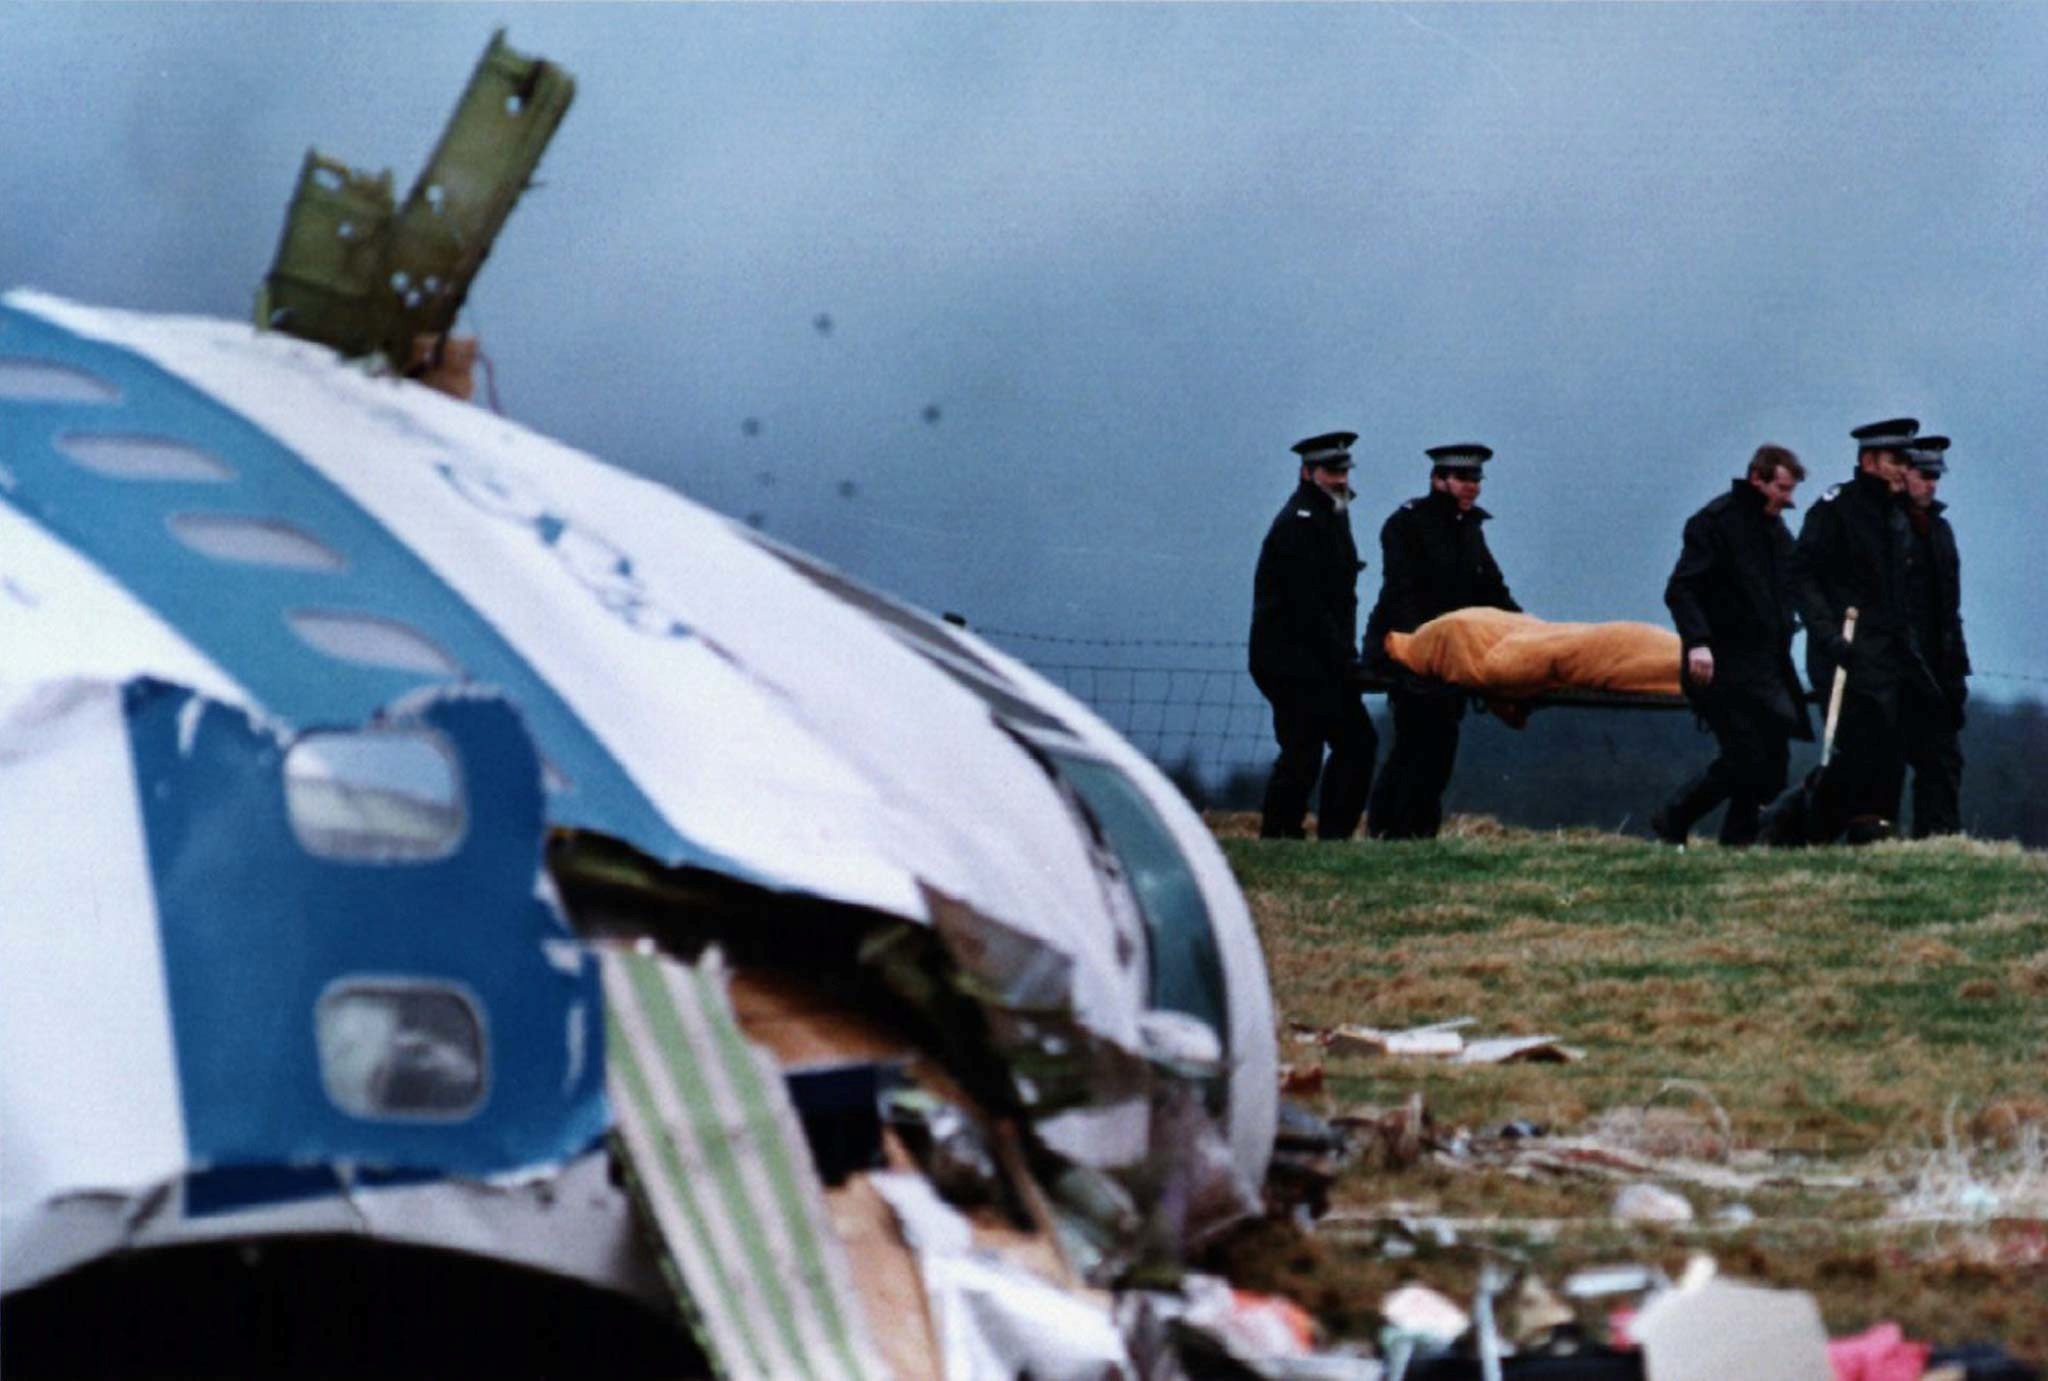 FILE PHOTO SHOWS POLICE STRETCHERING VICTIM FROM LOCKERBIE AIR DISIASTER.